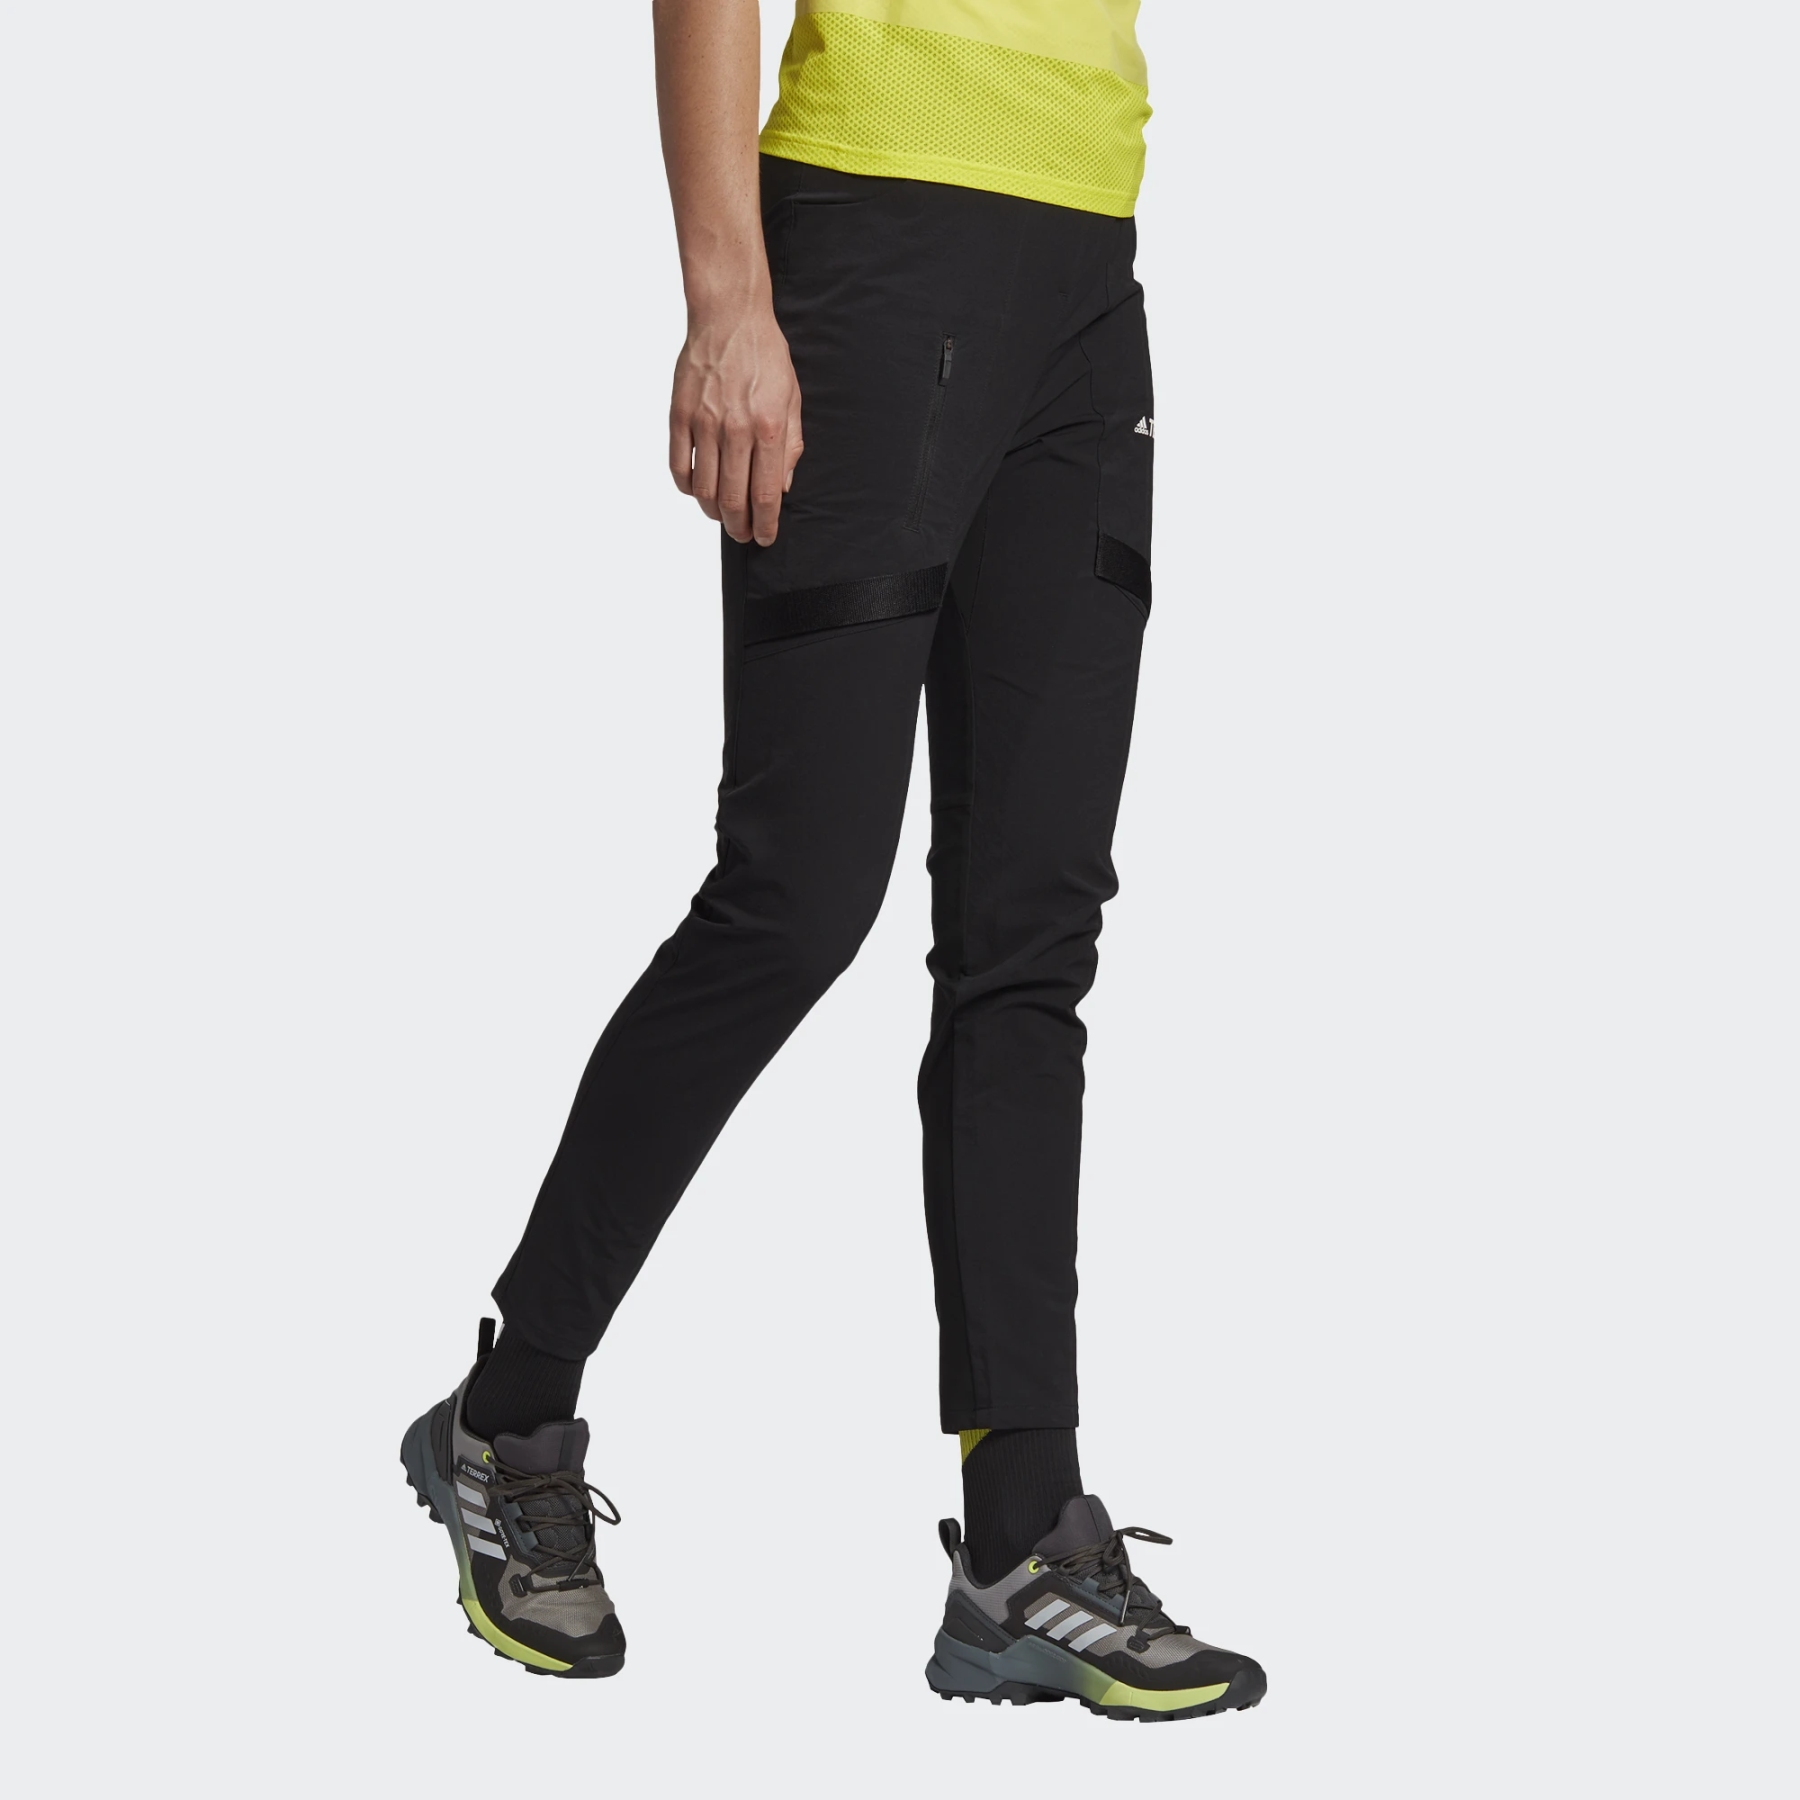 Buy ADIDAS Originals Women Green & Blue Solid Joggers - Track Pants for  Women 9911847 | Myntra